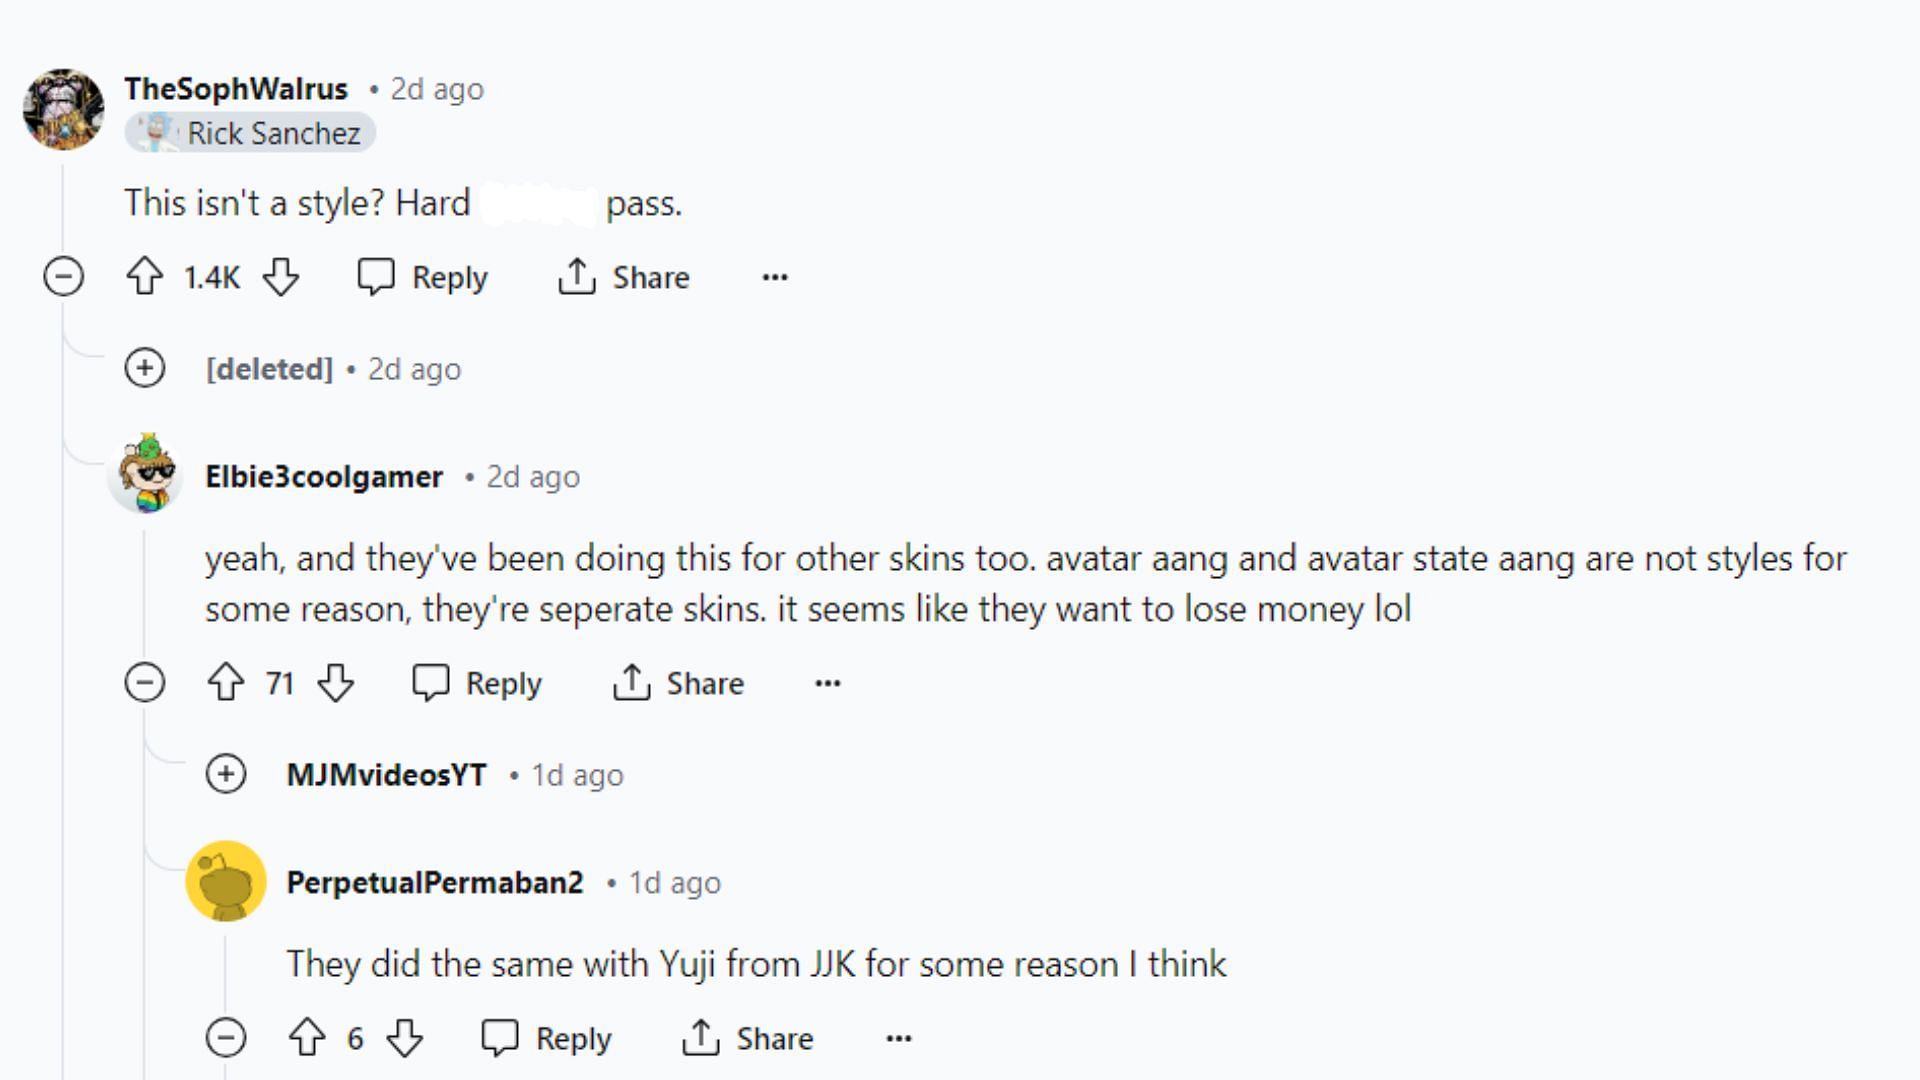 Comments from the Fortnite community